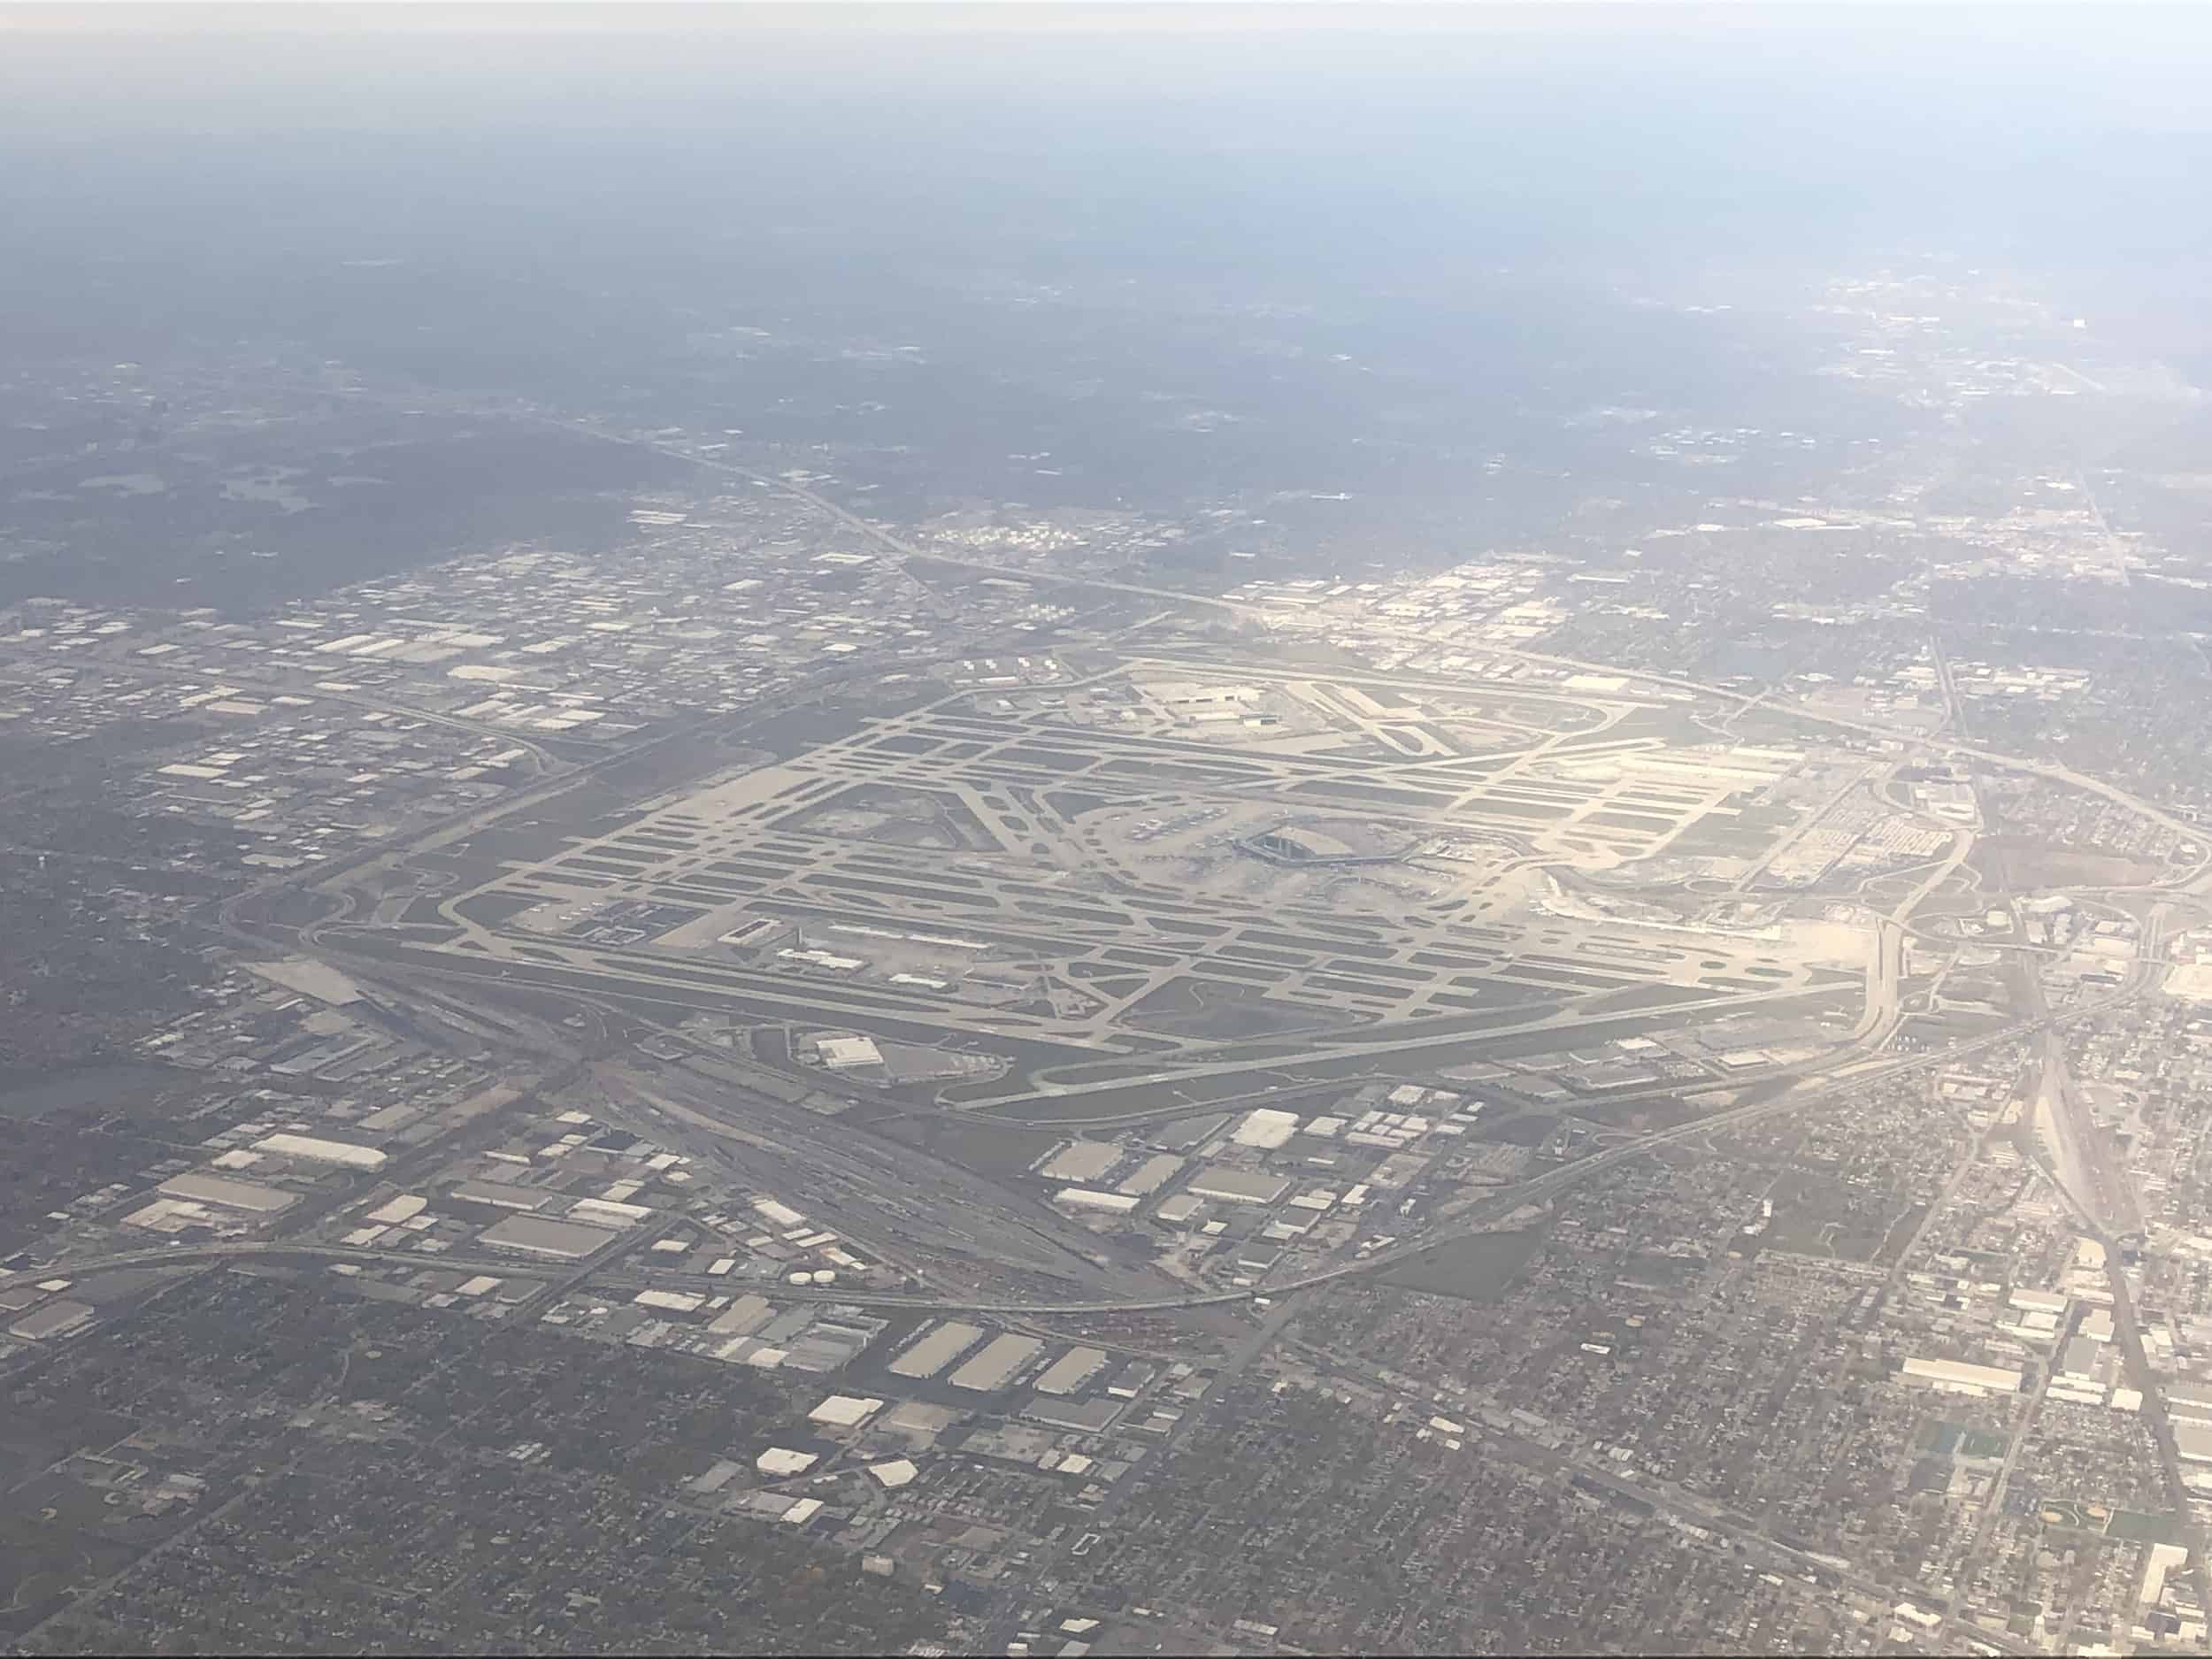 O'Hare from the air